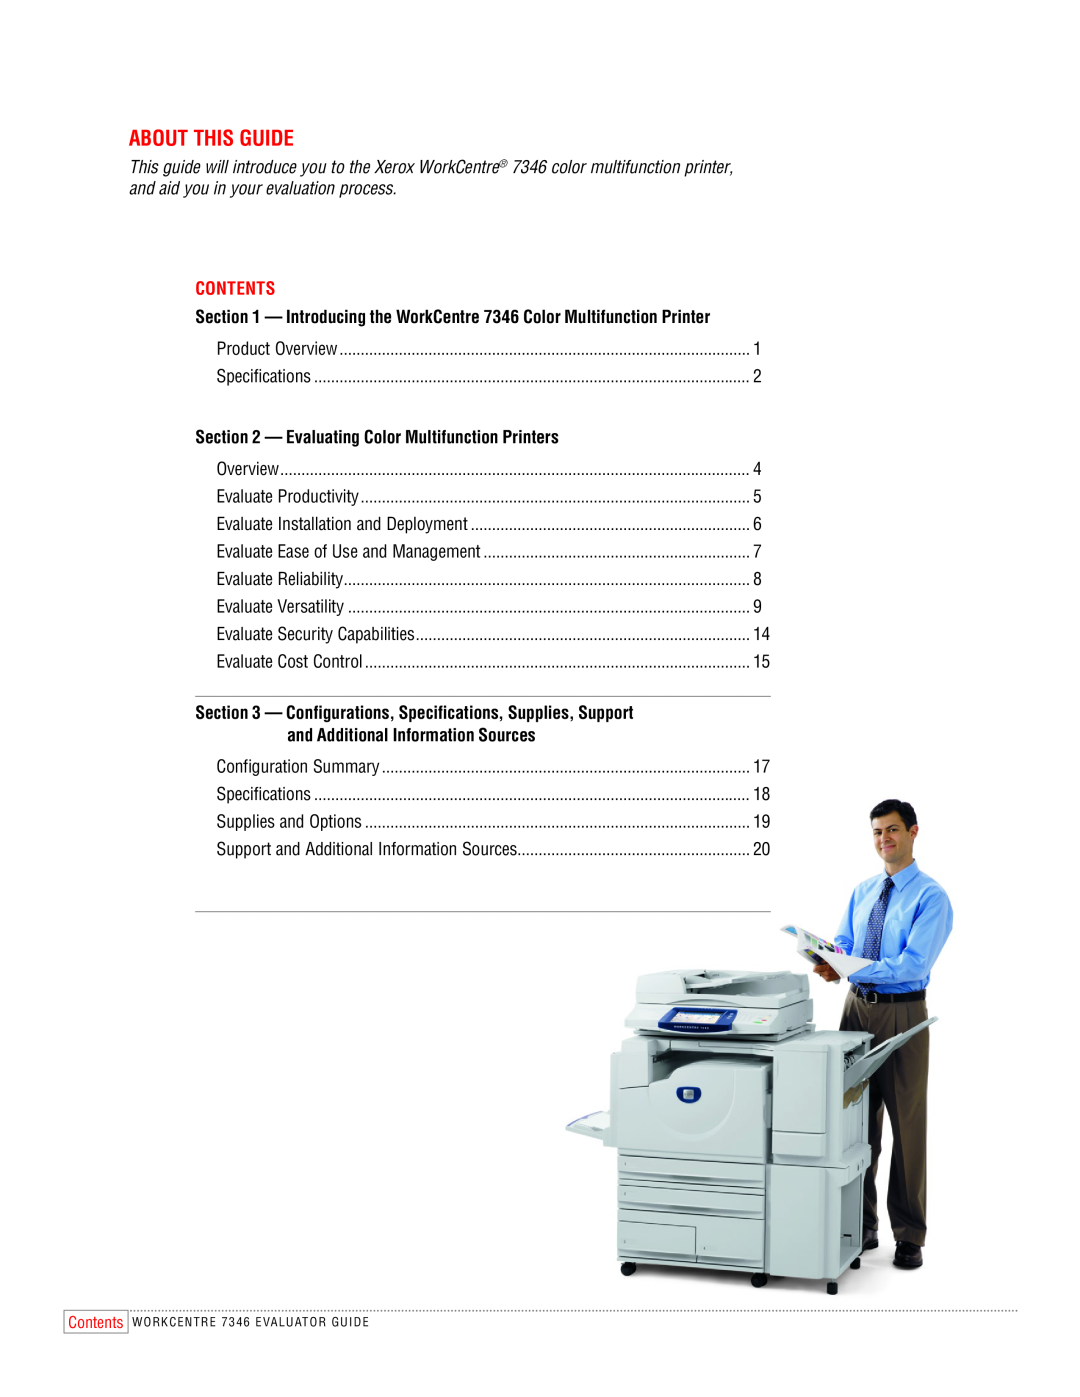 Xerox 7346 manual About this Guide, Contents, Evaluating Color Multifunction Printers, and Additional Information Sources 